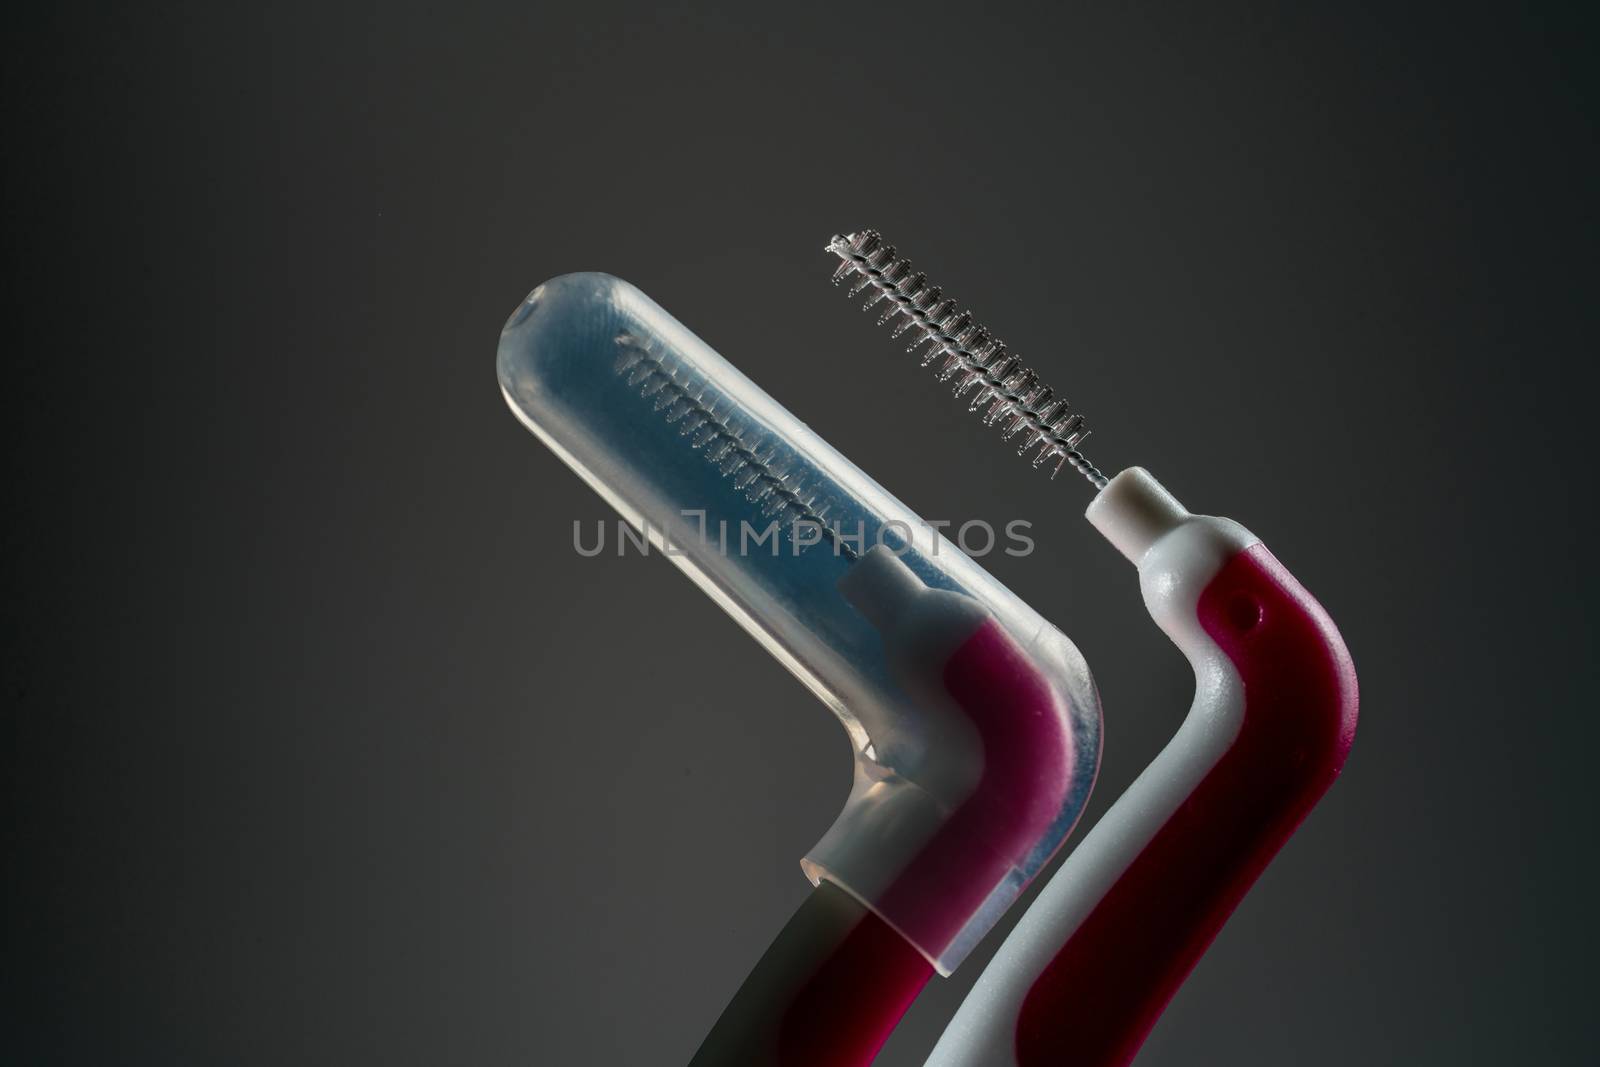 Interdental brush with opened cover isolated on dark background with copy space. Dental care concept. Equipment for get rid of food stuck in teeth